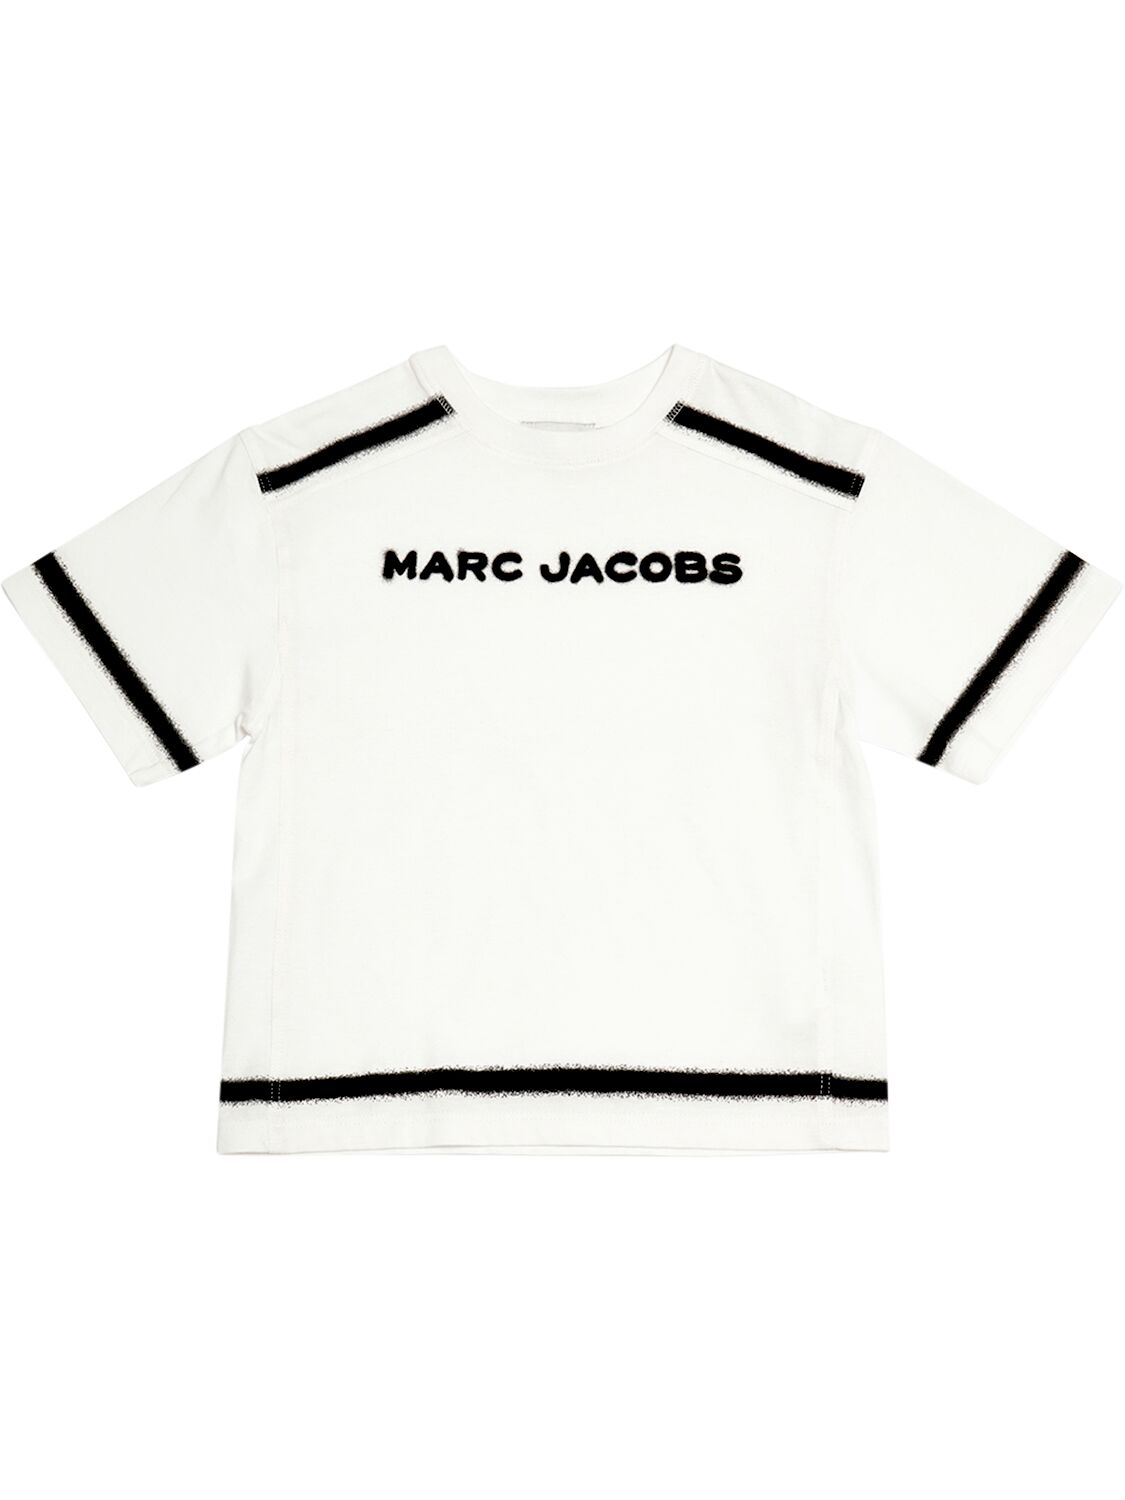 Marc Jacobs Kids' Organic Cotton Jersey T-shirt In White